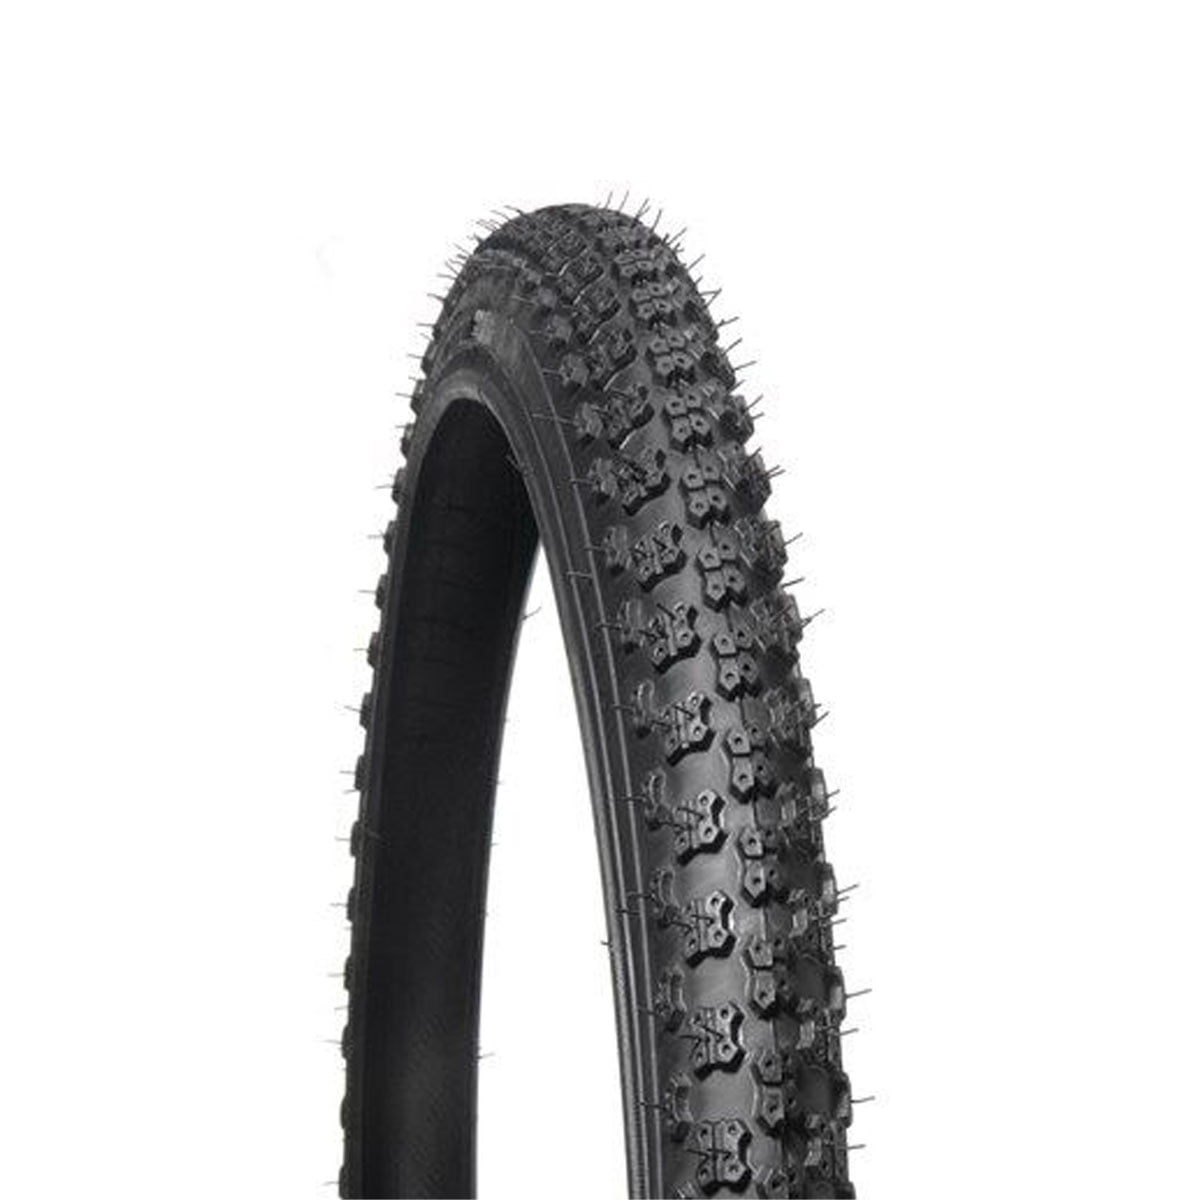 20 X 1.75 PAIR Bicycle Tire Kenda COMP 3 All Black Bmx Bike With Tubes And... 